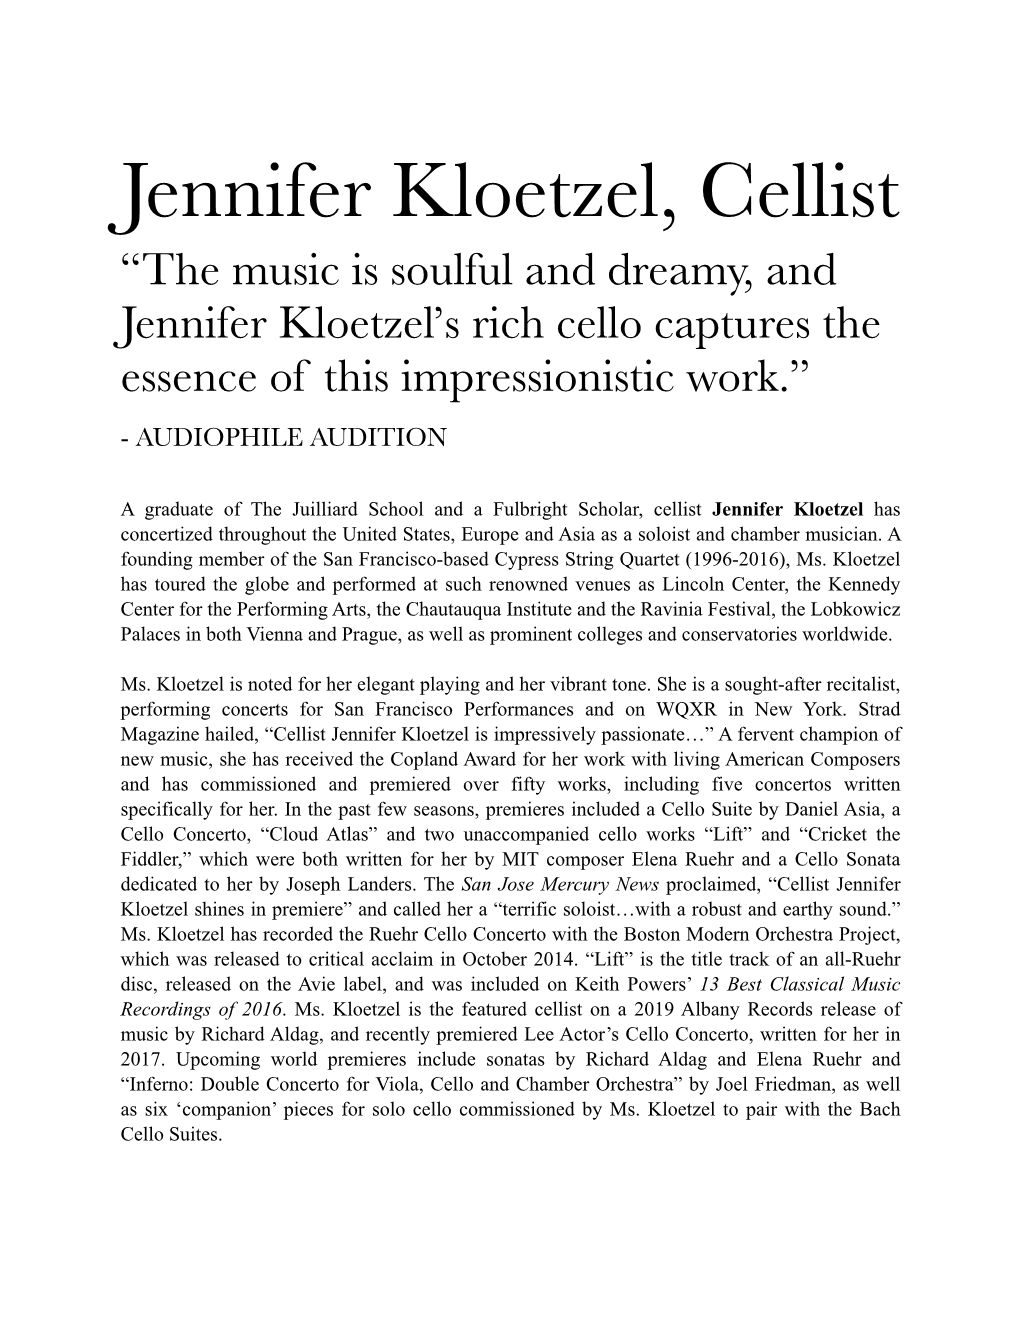 Jennifer Kloetzel, Cellist “The Music Is Soulful and Dreamy, and Jennifer Kloetzel’S Rich Cello Captures the Essence of This Impressionistic Work.”